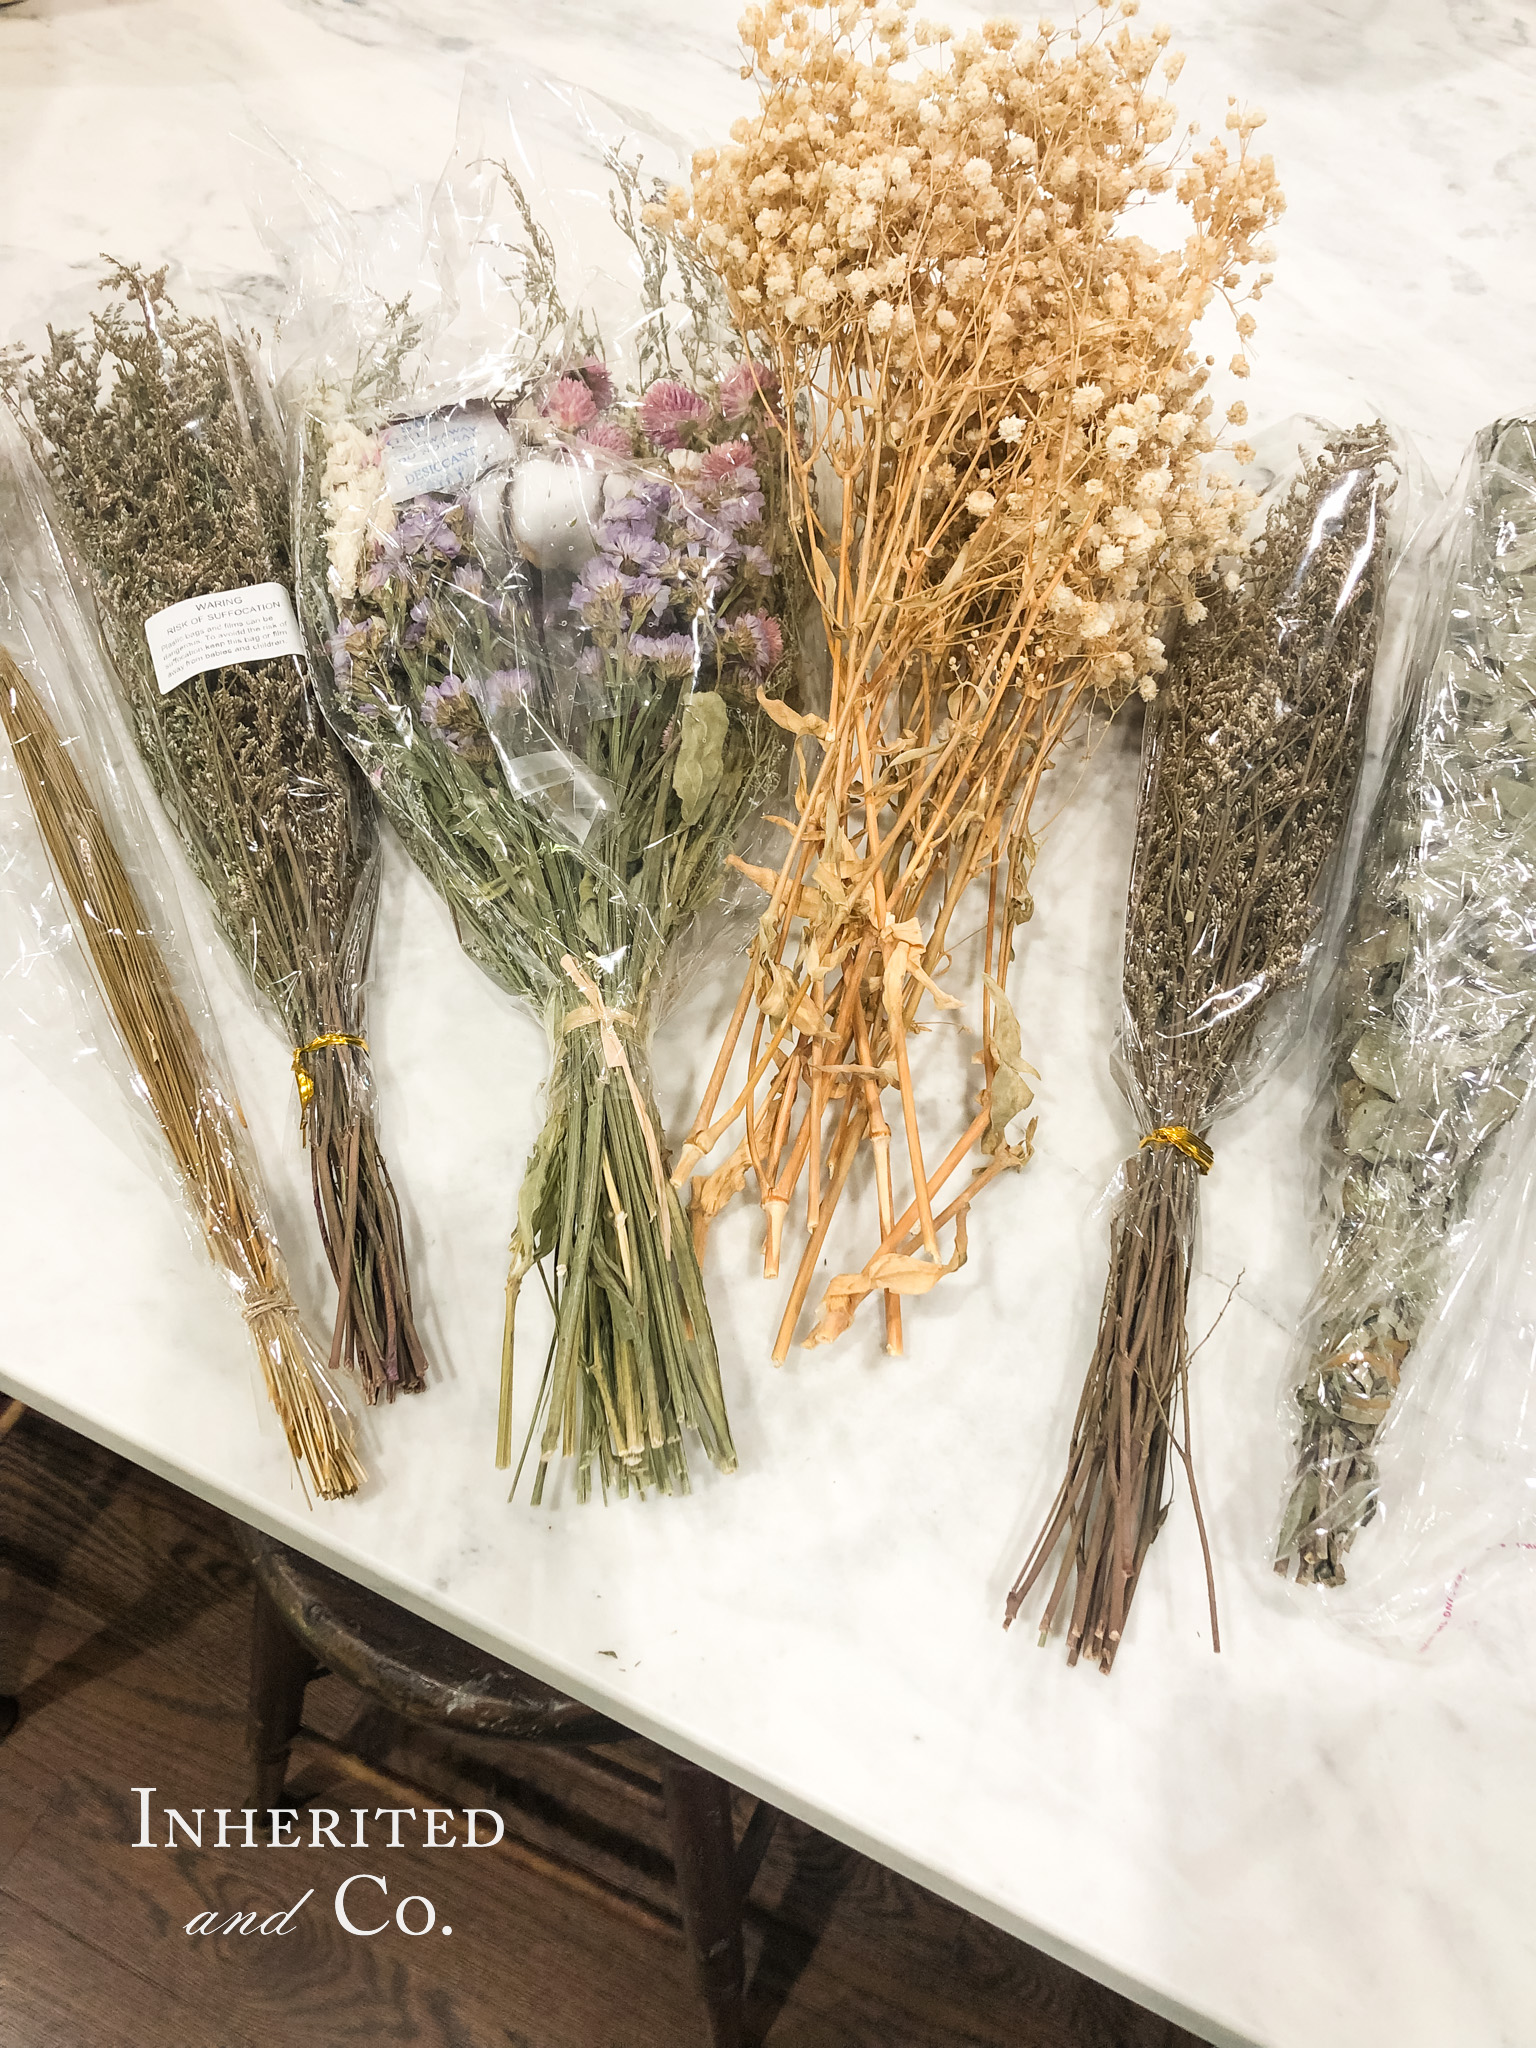 six bundles of dried flowers on a white marble countertop